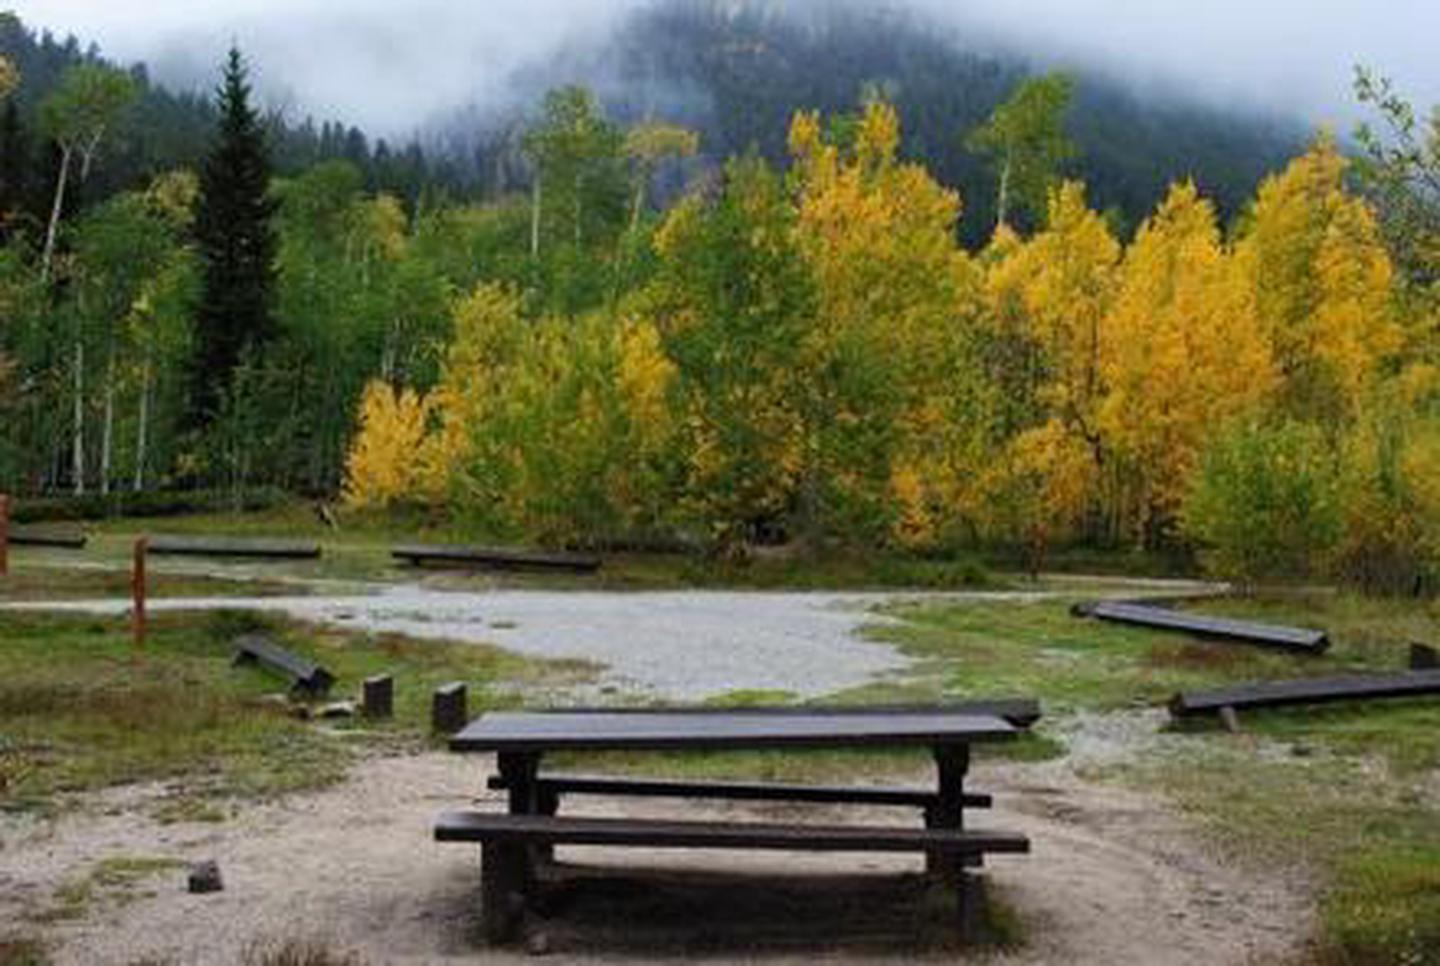 Picnic table with aspen trees with fall foliage Aspen trees with fall foliage.